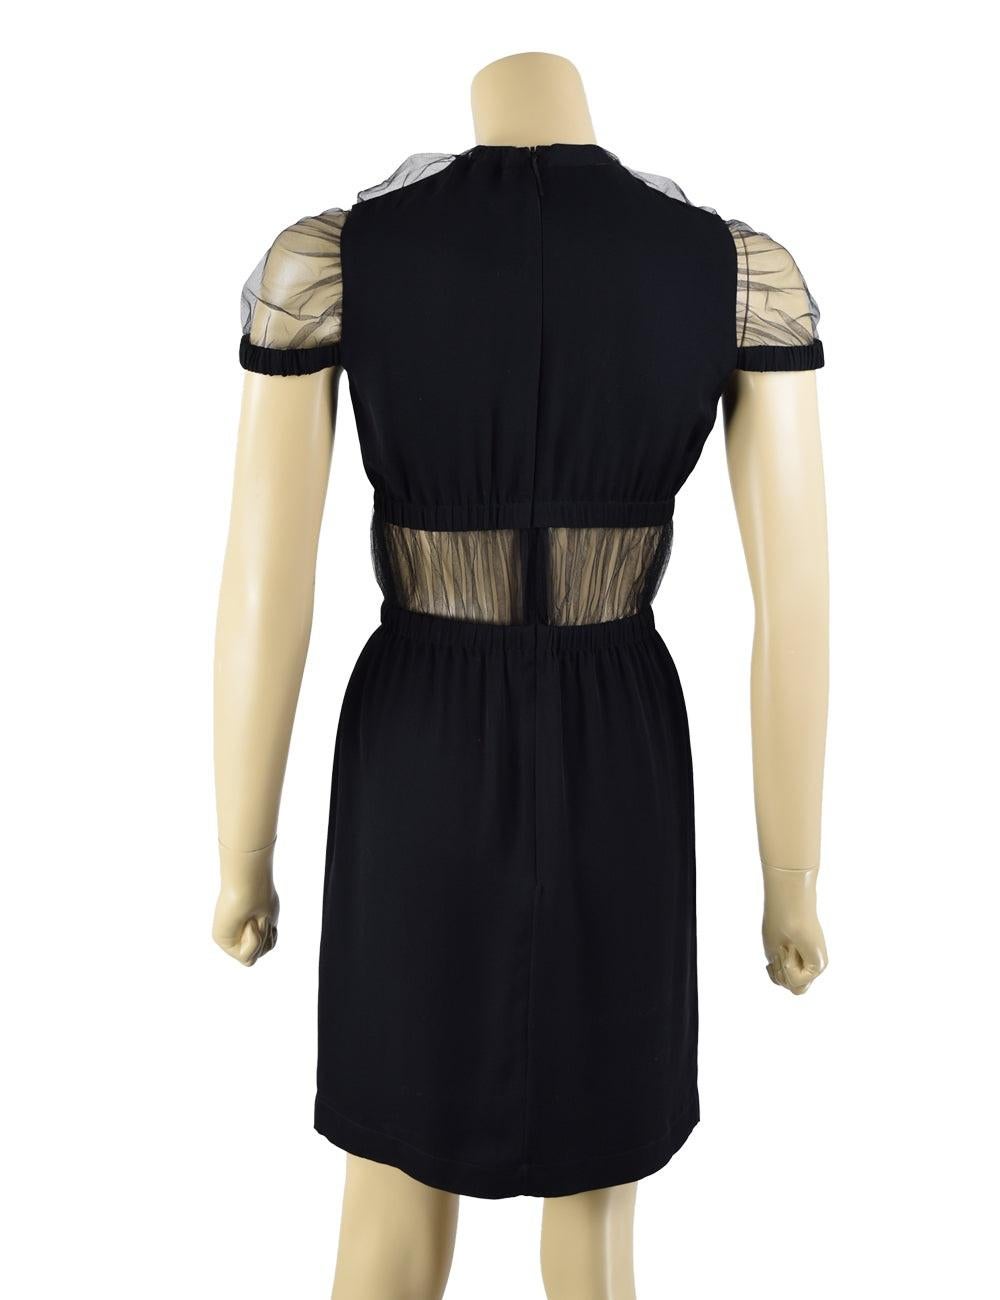 Christopher Kane black silk and net panel mini dress. Elastic sleeve trim and wait. Hidden back zipper

Additional information:
Material: Silk & Mesh
Features: mesh detailing on sleeves and around waist area, back zipper
Size: US 6 / EU 36
Overall